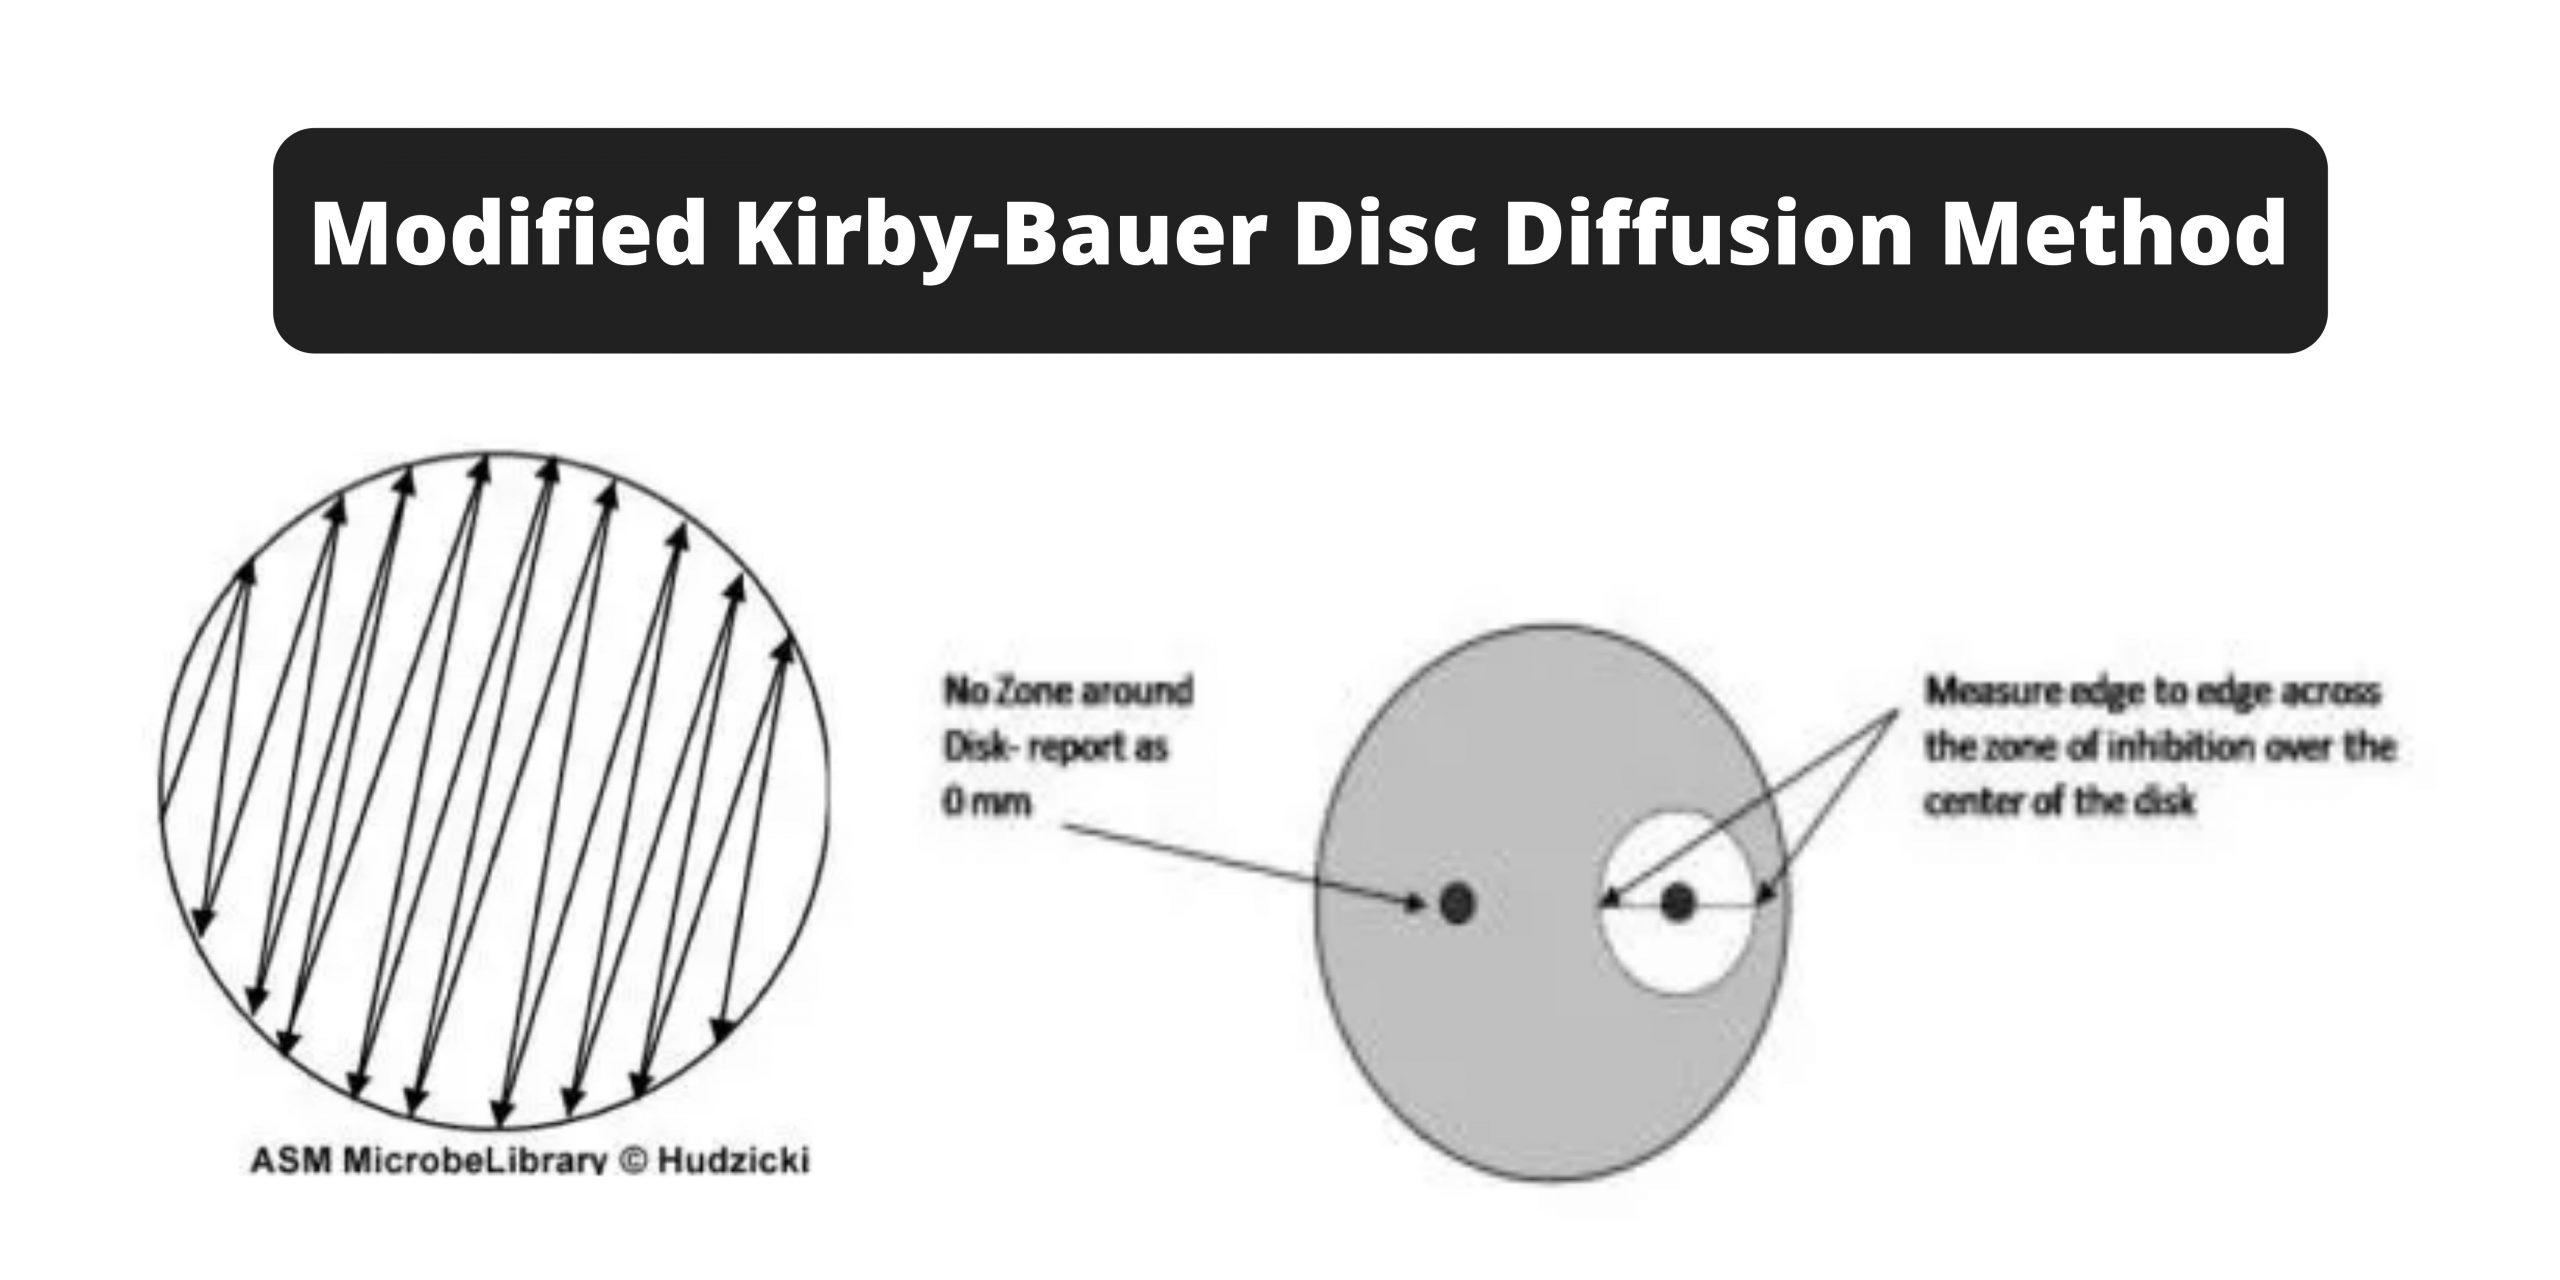 Modified Kirby-Bauer Disc Diffusion Method